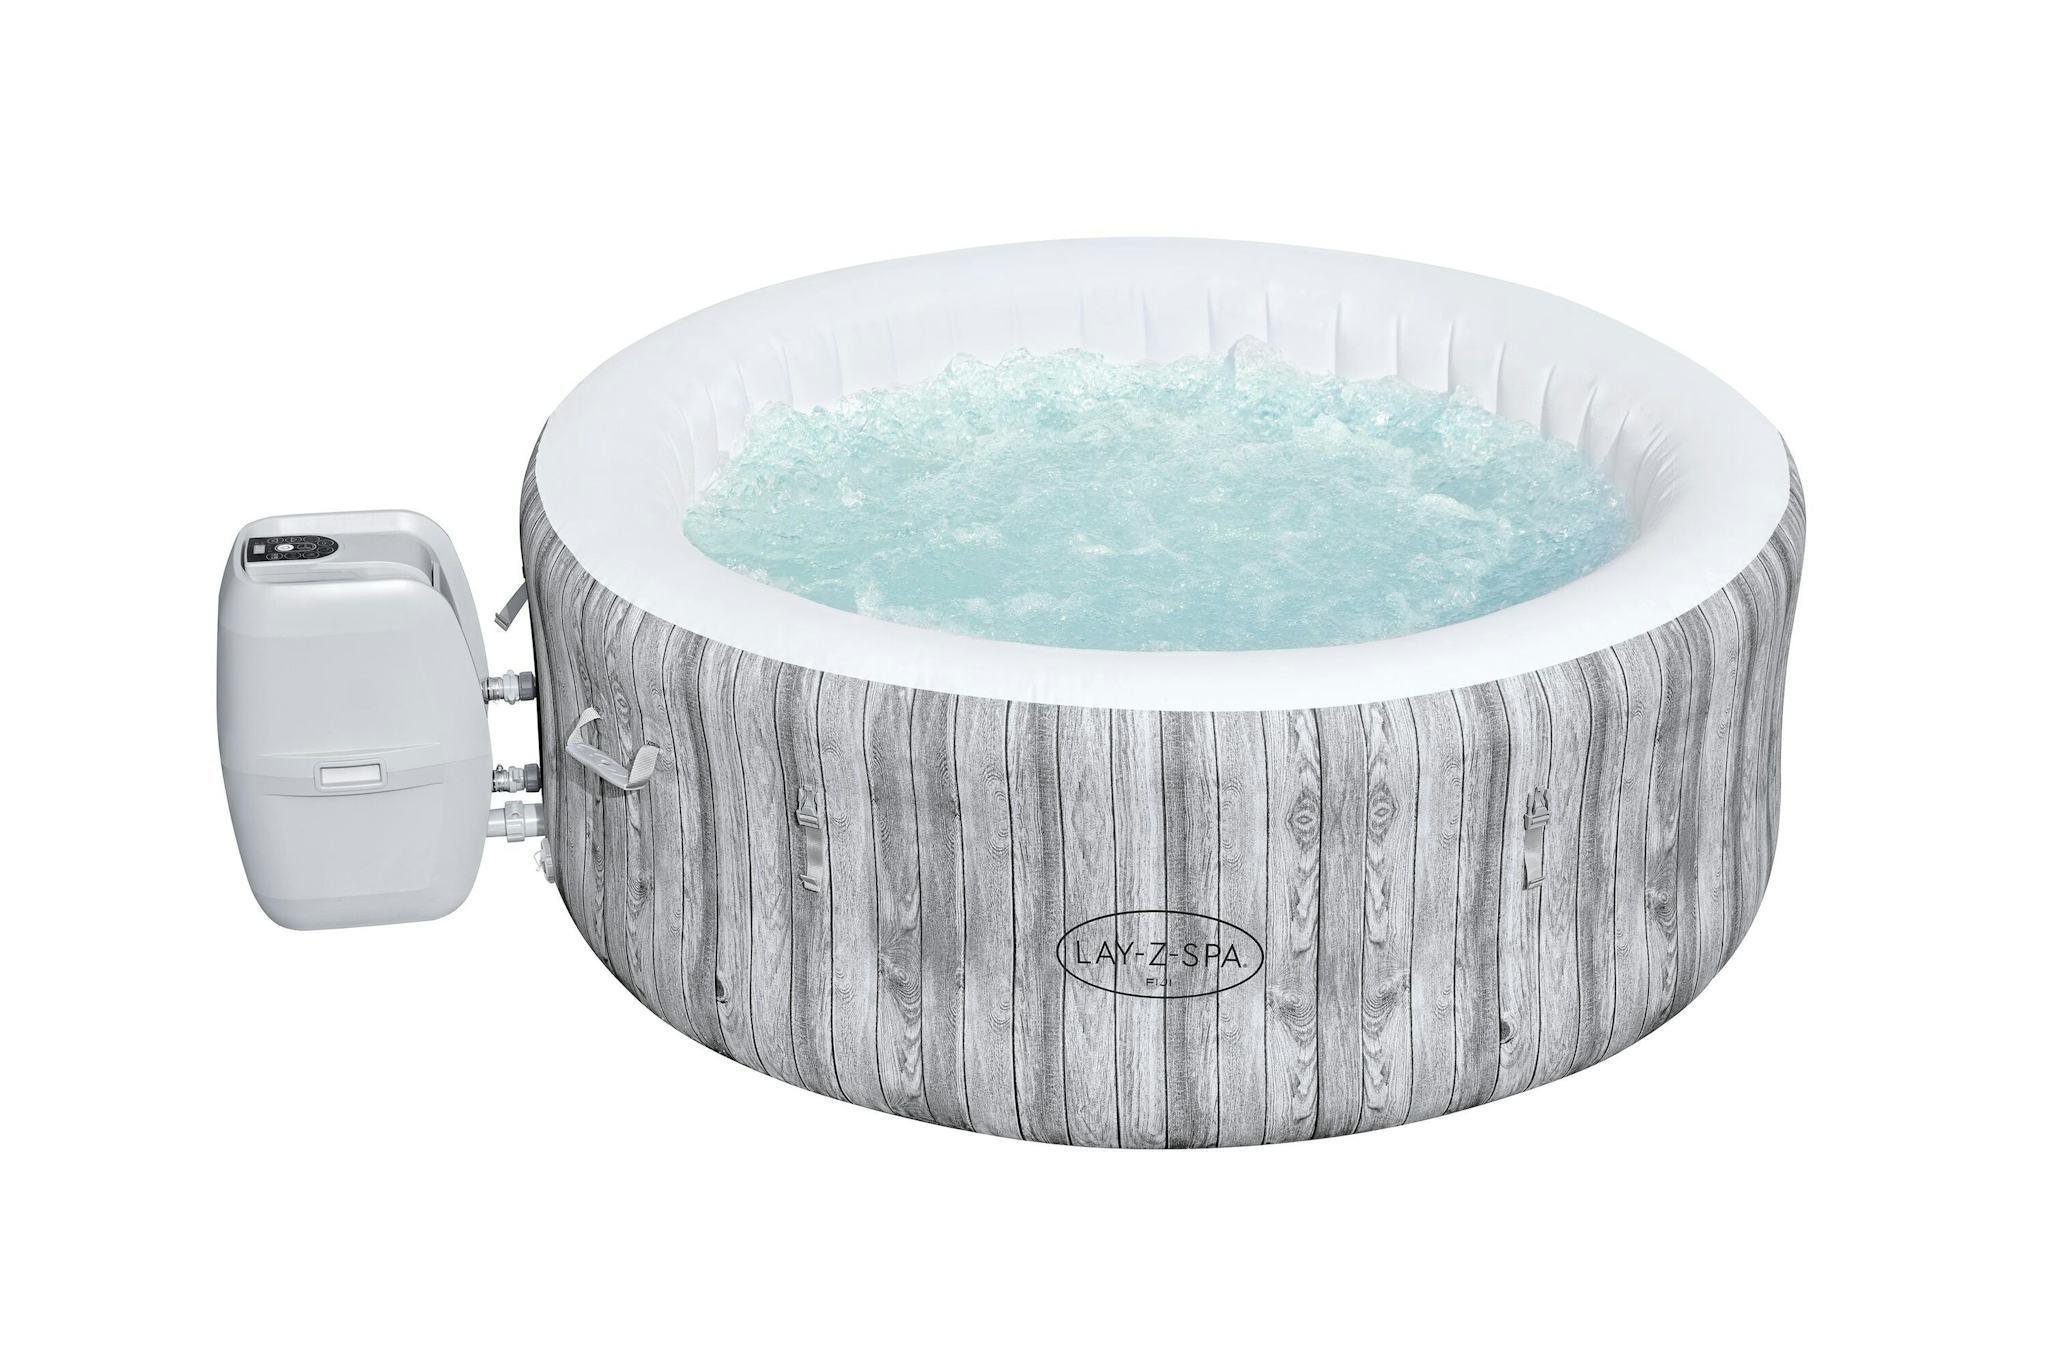 Spas Gonflables Spa gonflable rond Lay-Z-Spa Fiji Airjet™ 2 - 4 personnes Bestway 1